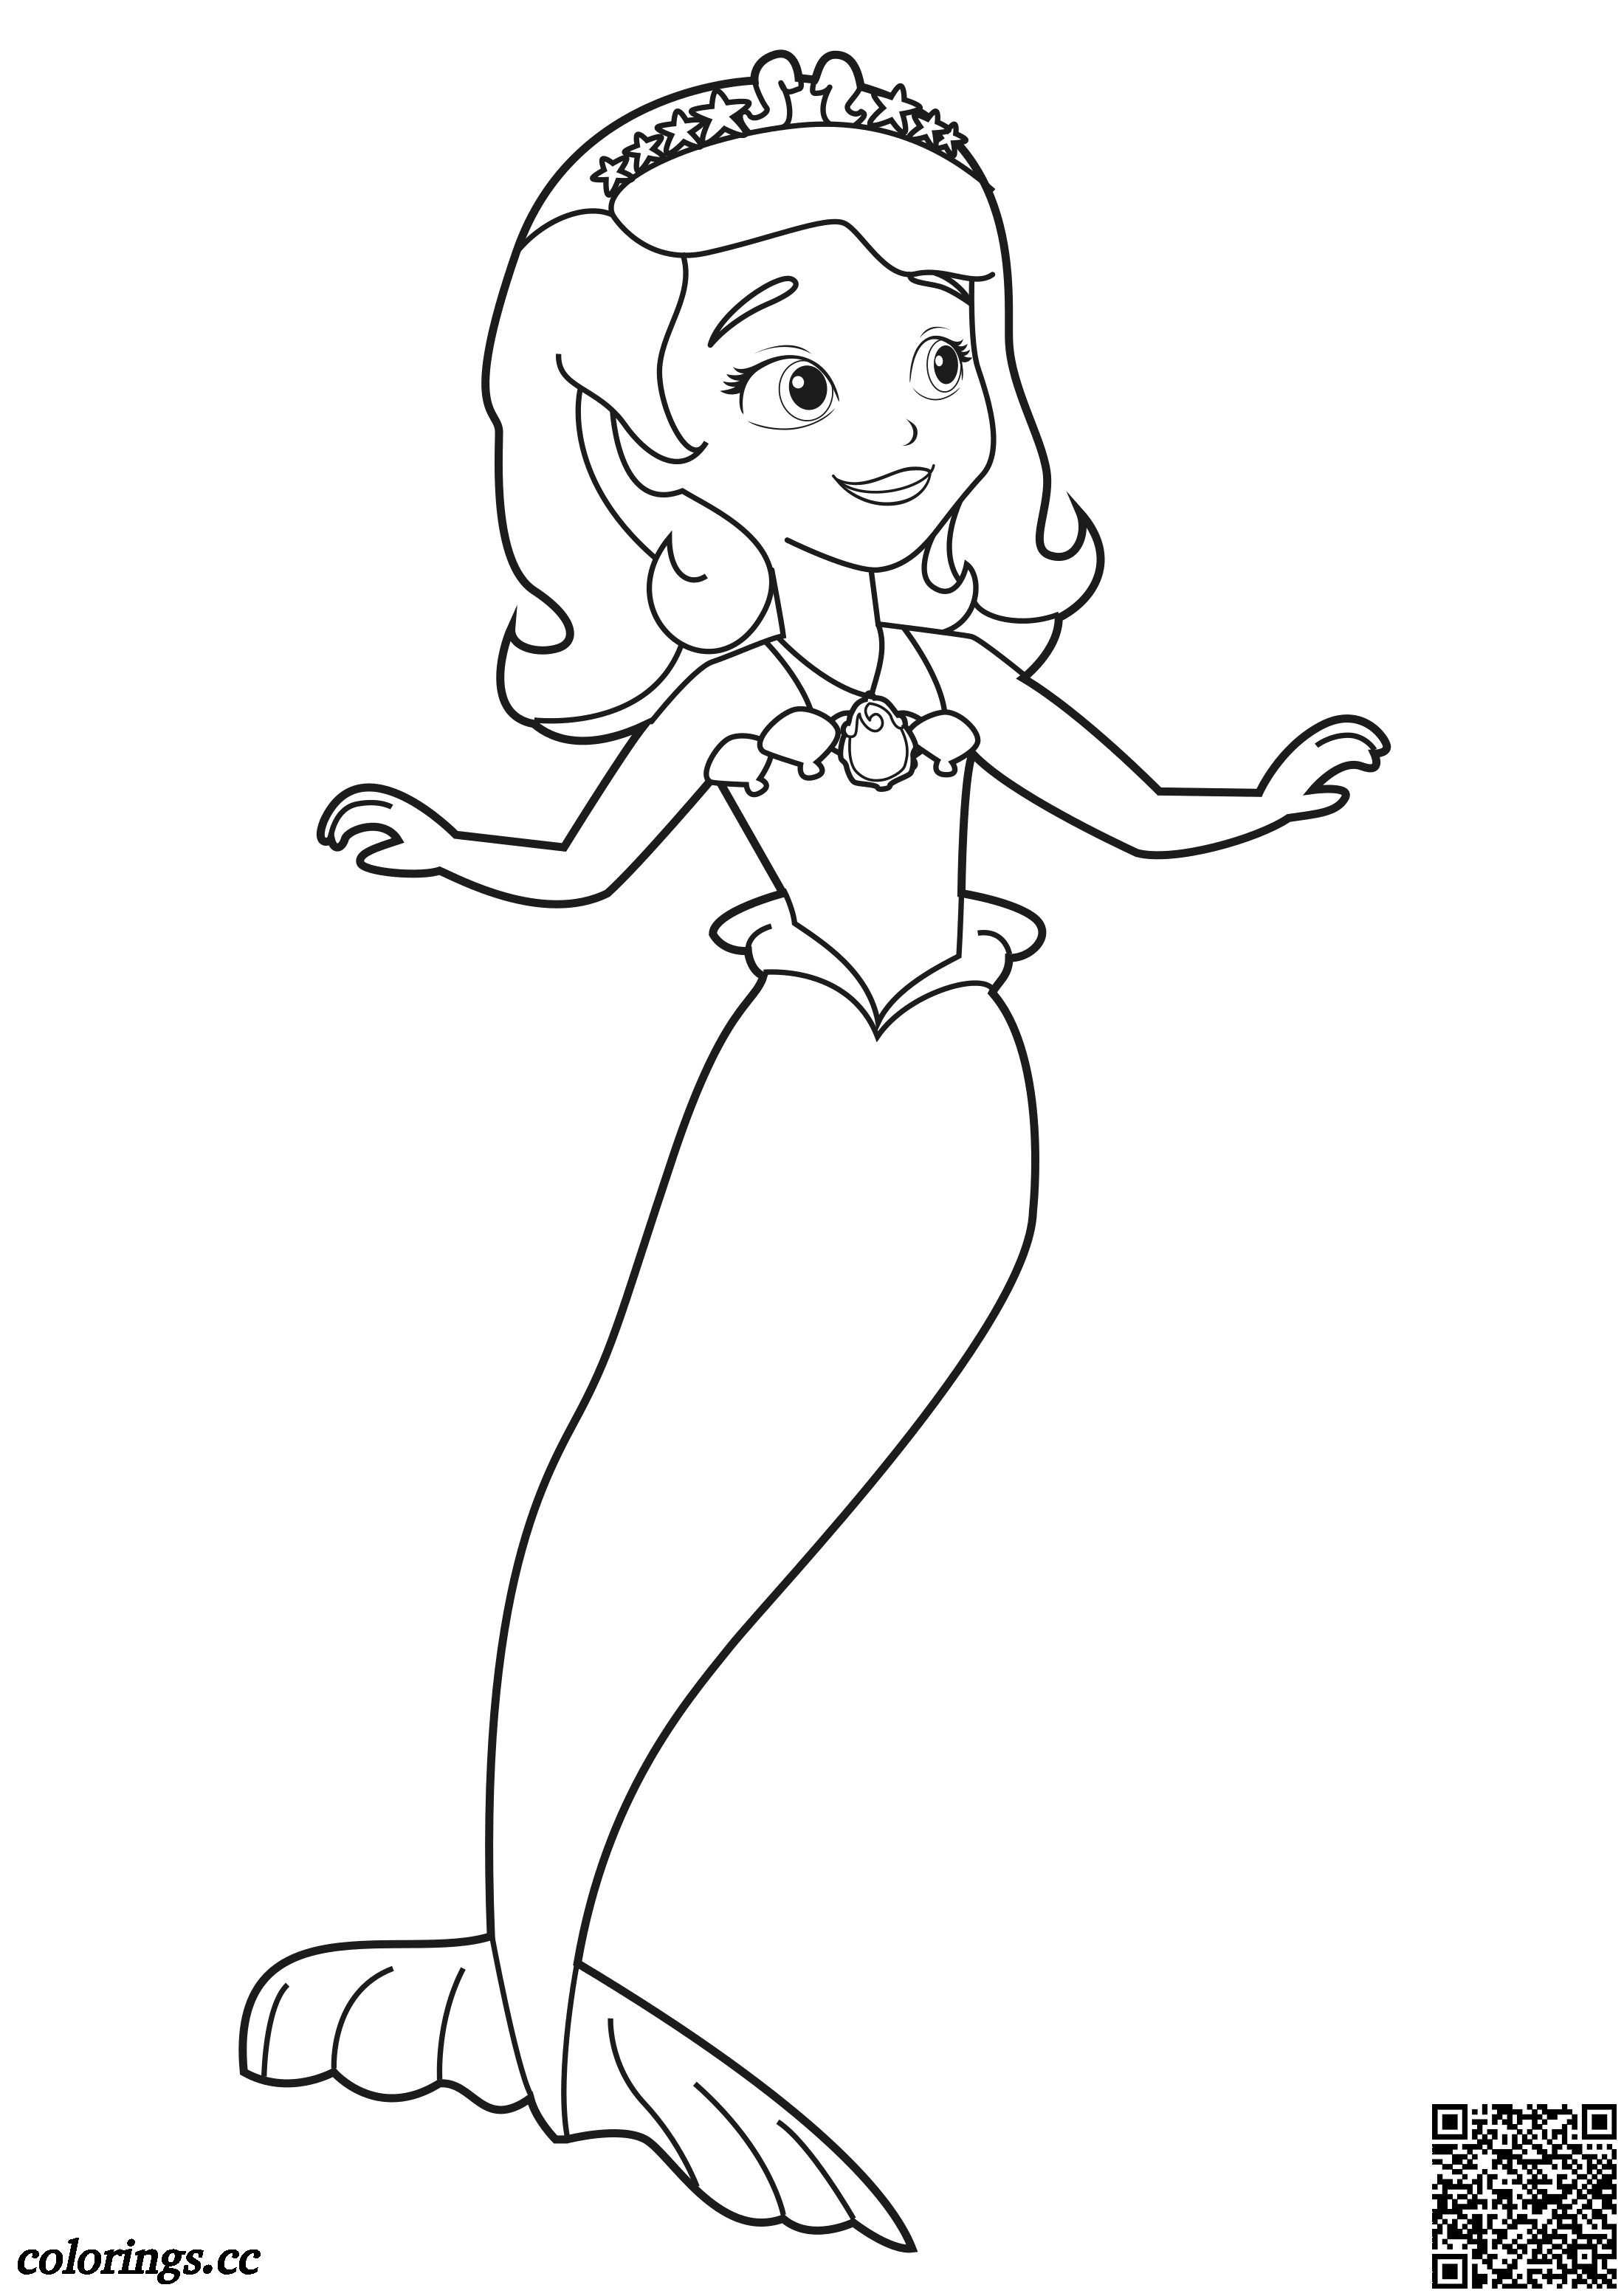 Princess sofia mermaid coloring pages, Sofia the First coloring pages